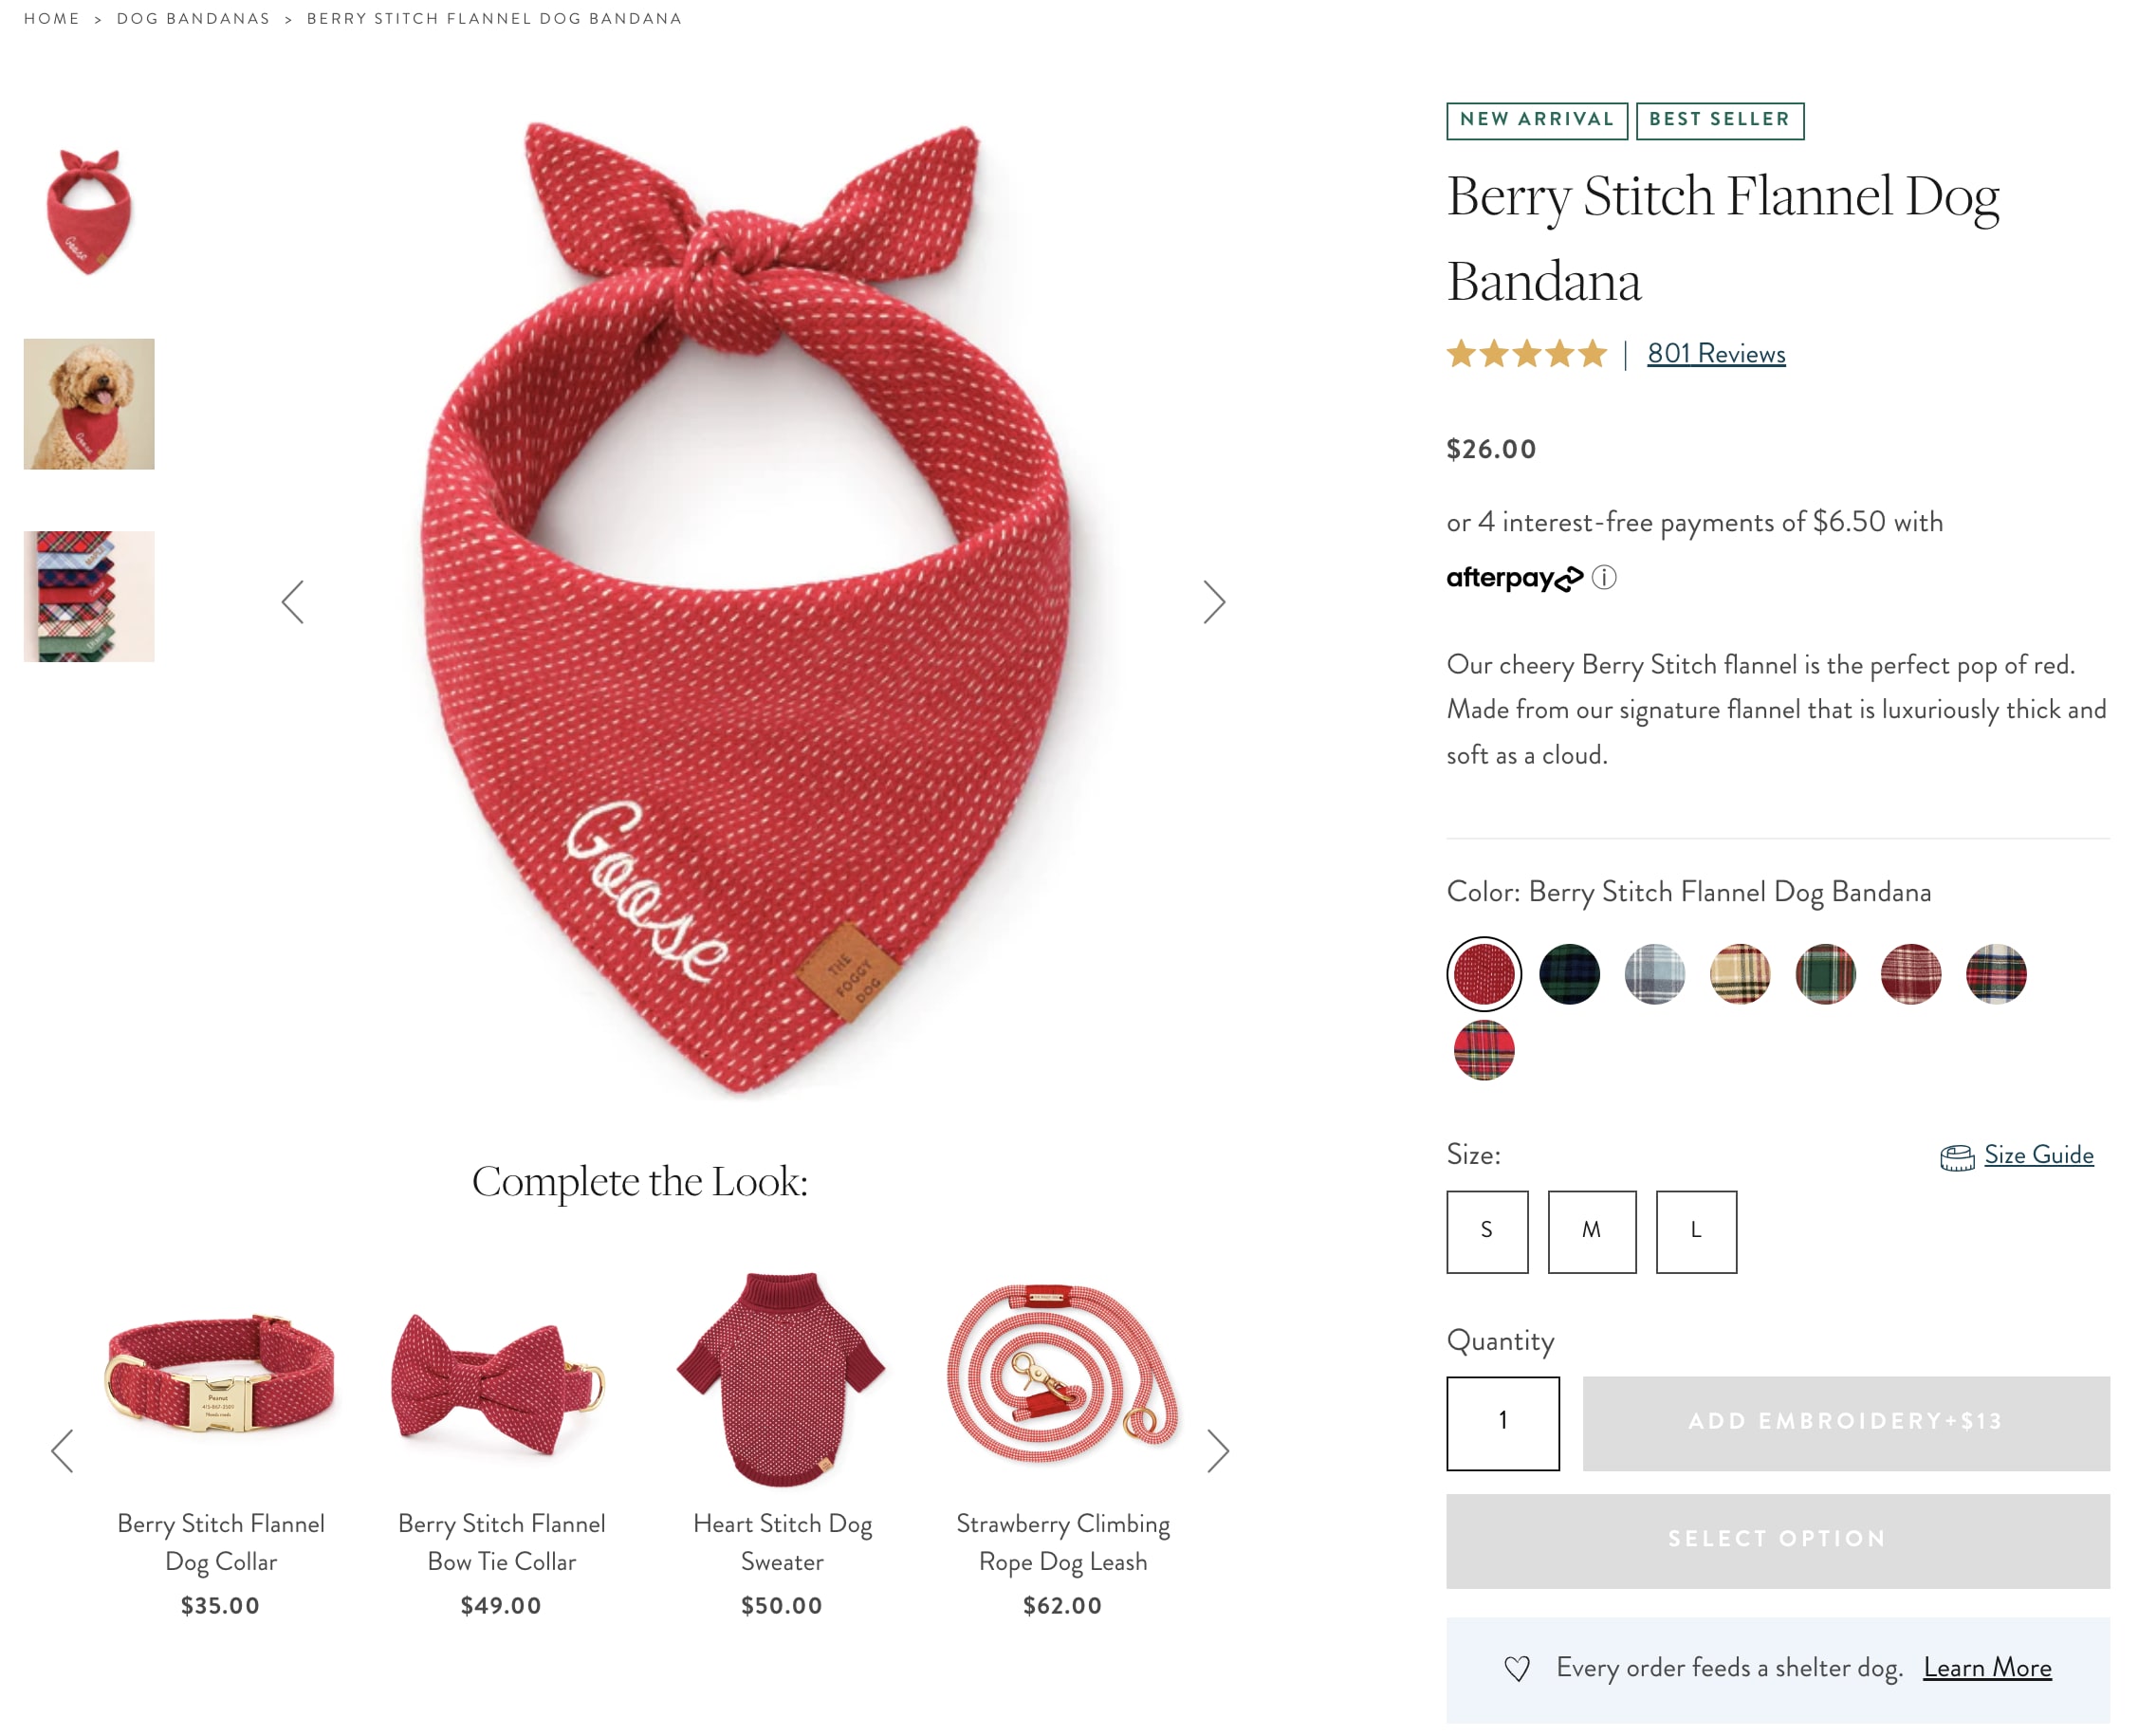 Product page for The Foggy Dog pet bandana.